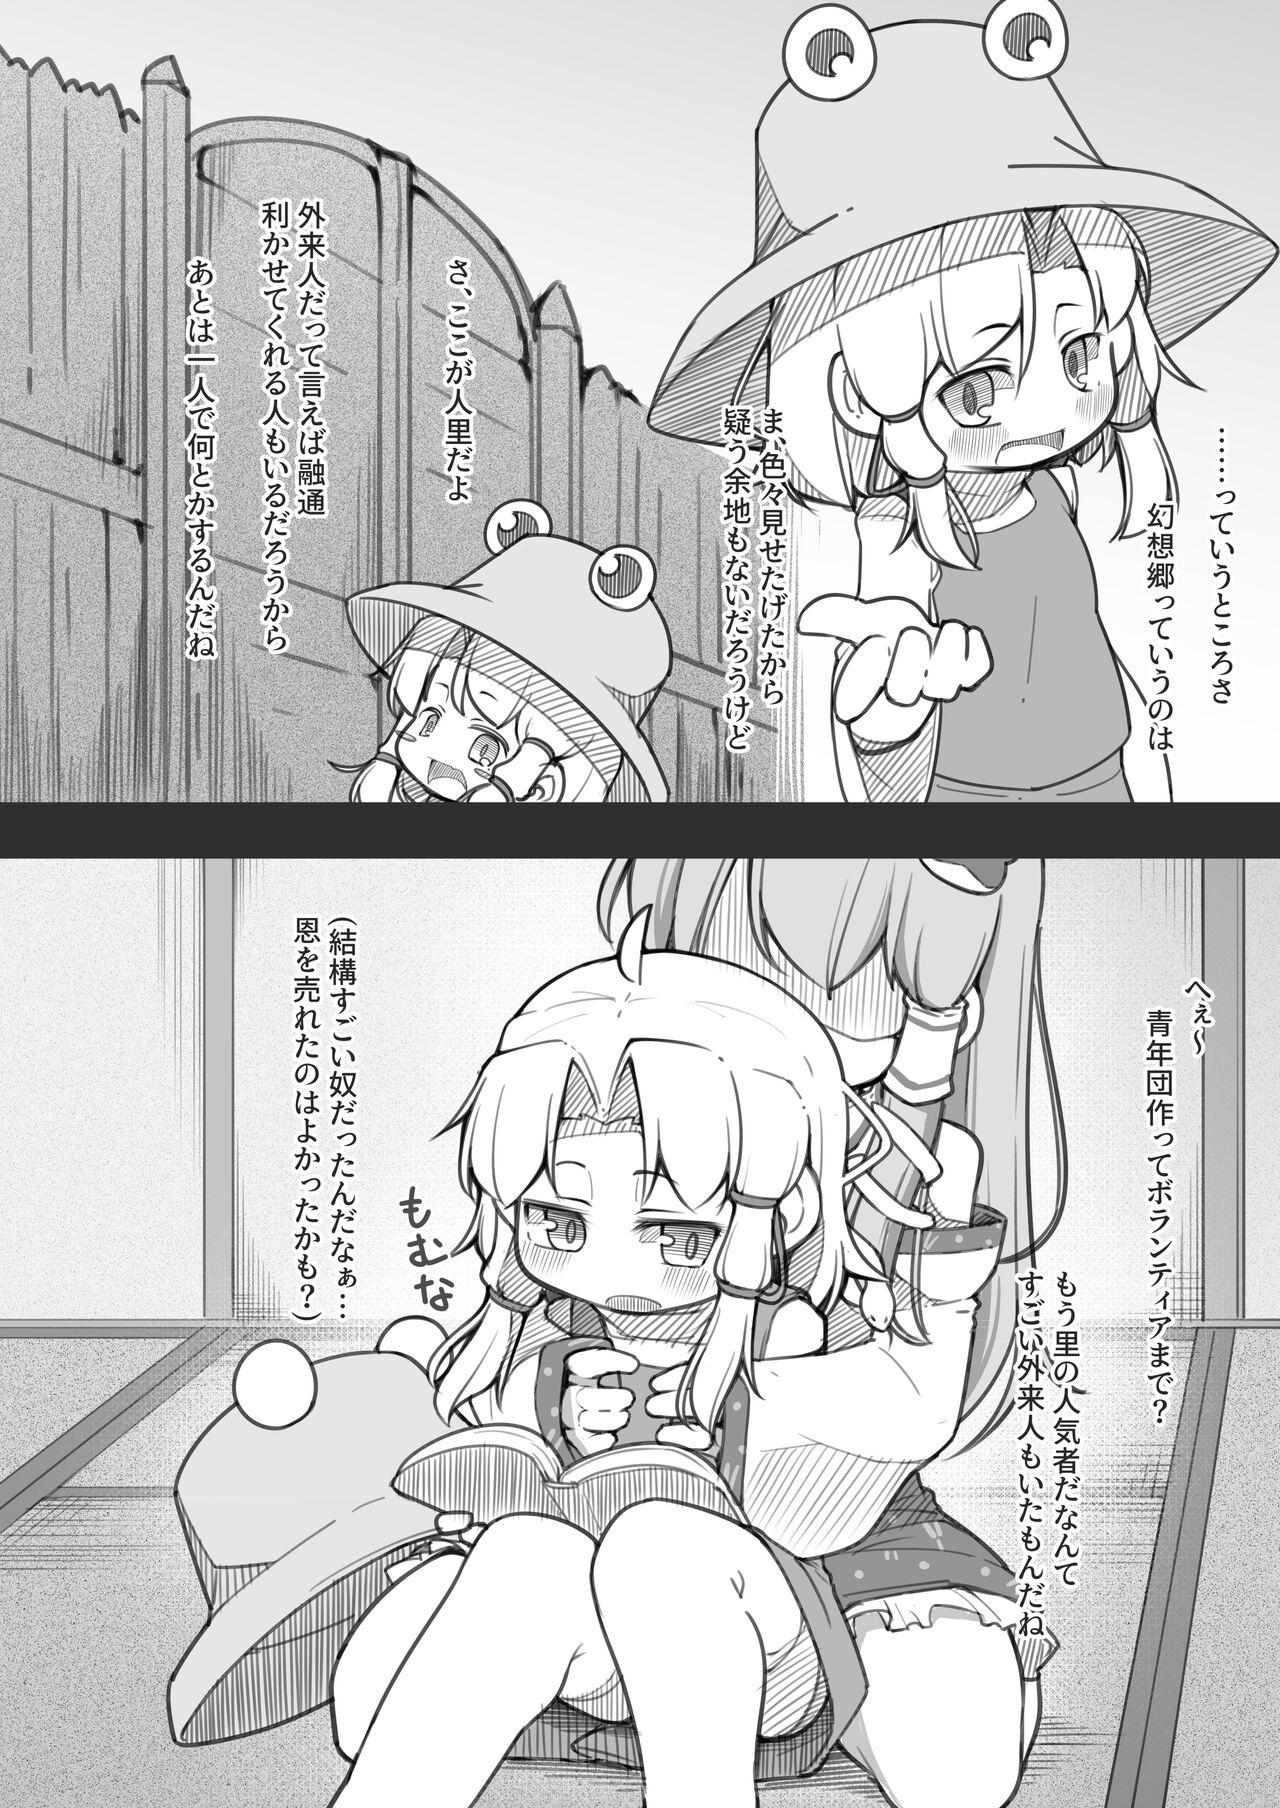 Bed 幻想入りしたカリスマ教祖に諏訪子さまが祀り上げられる話 - Touhou project Butt Sex - Page 3